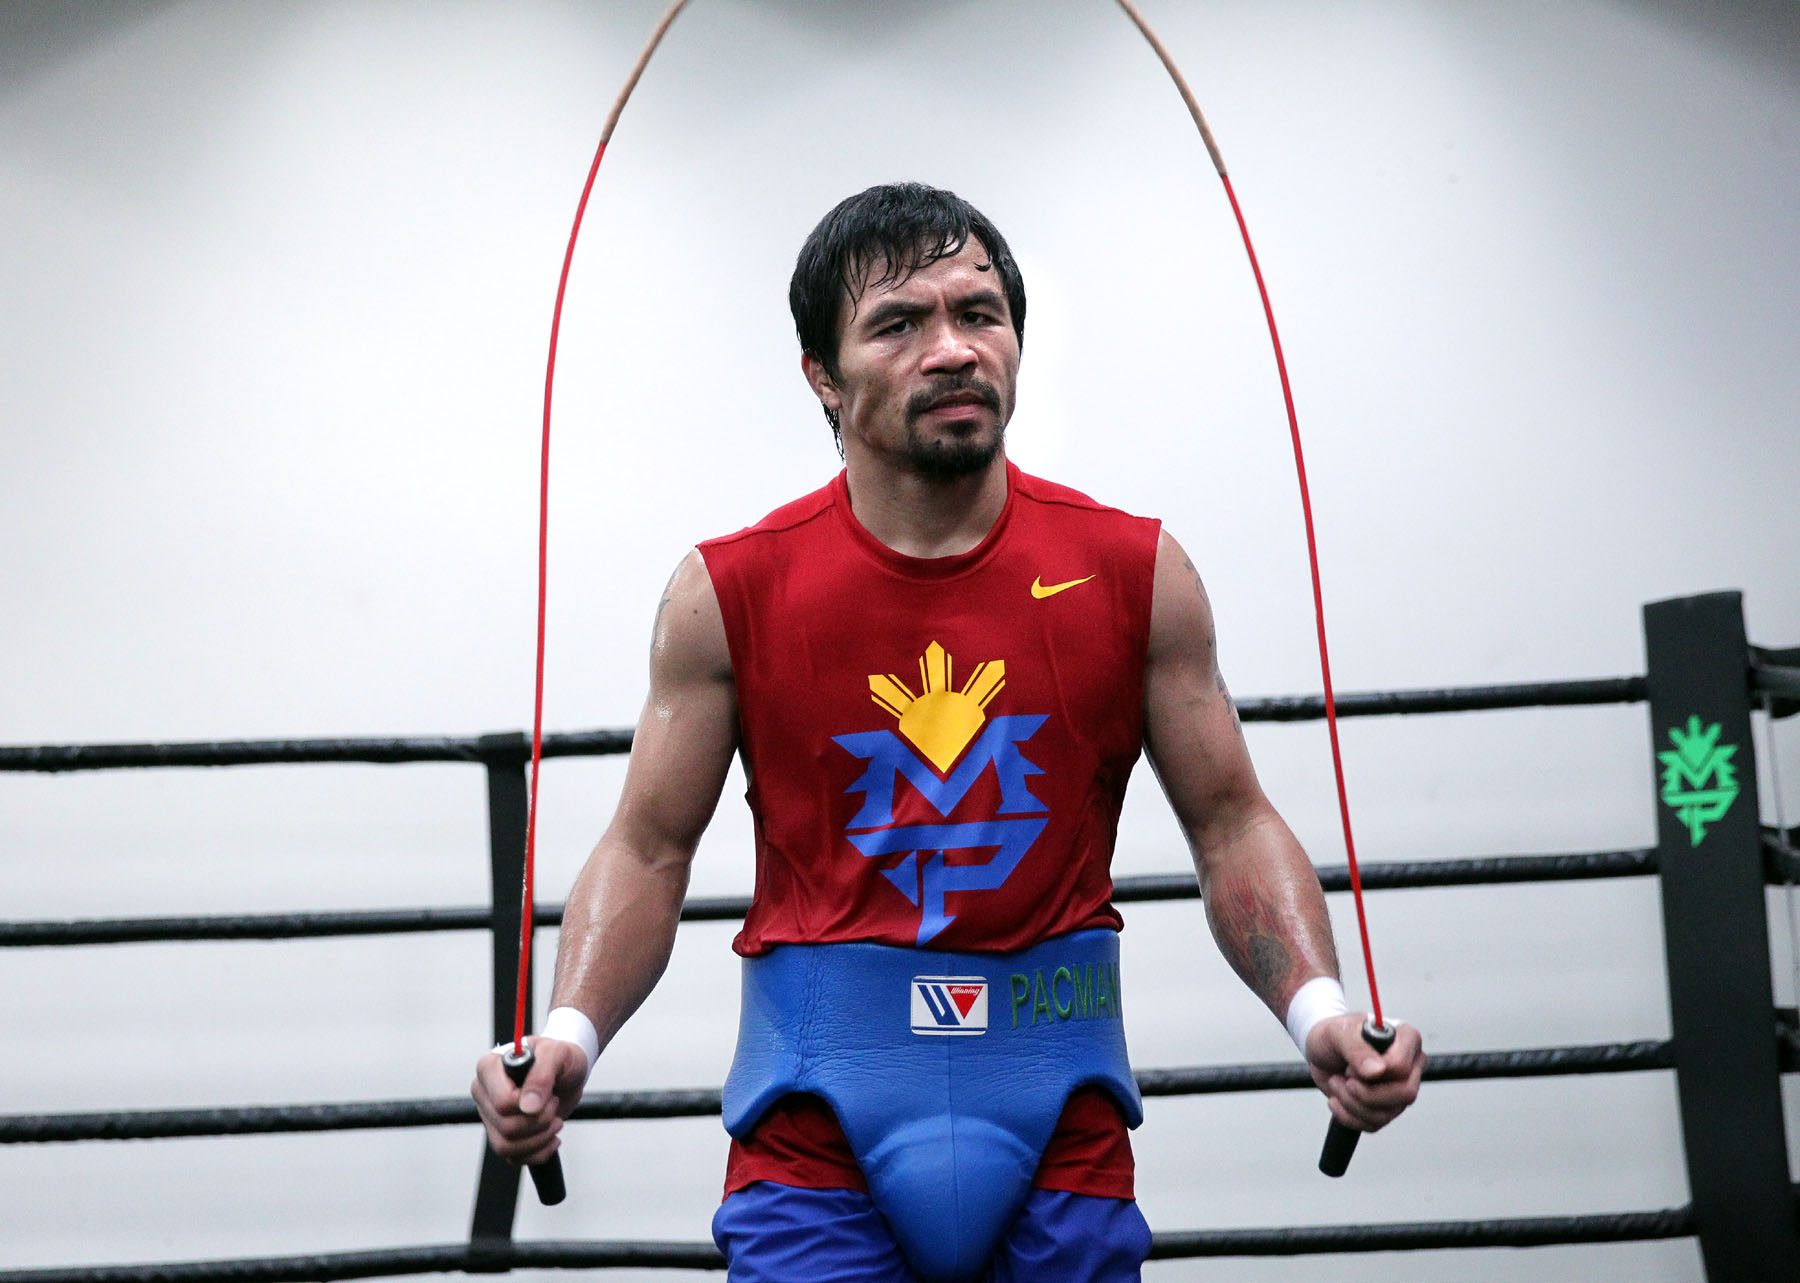 WATCH: Pacquiao does intense strength training at UCLA